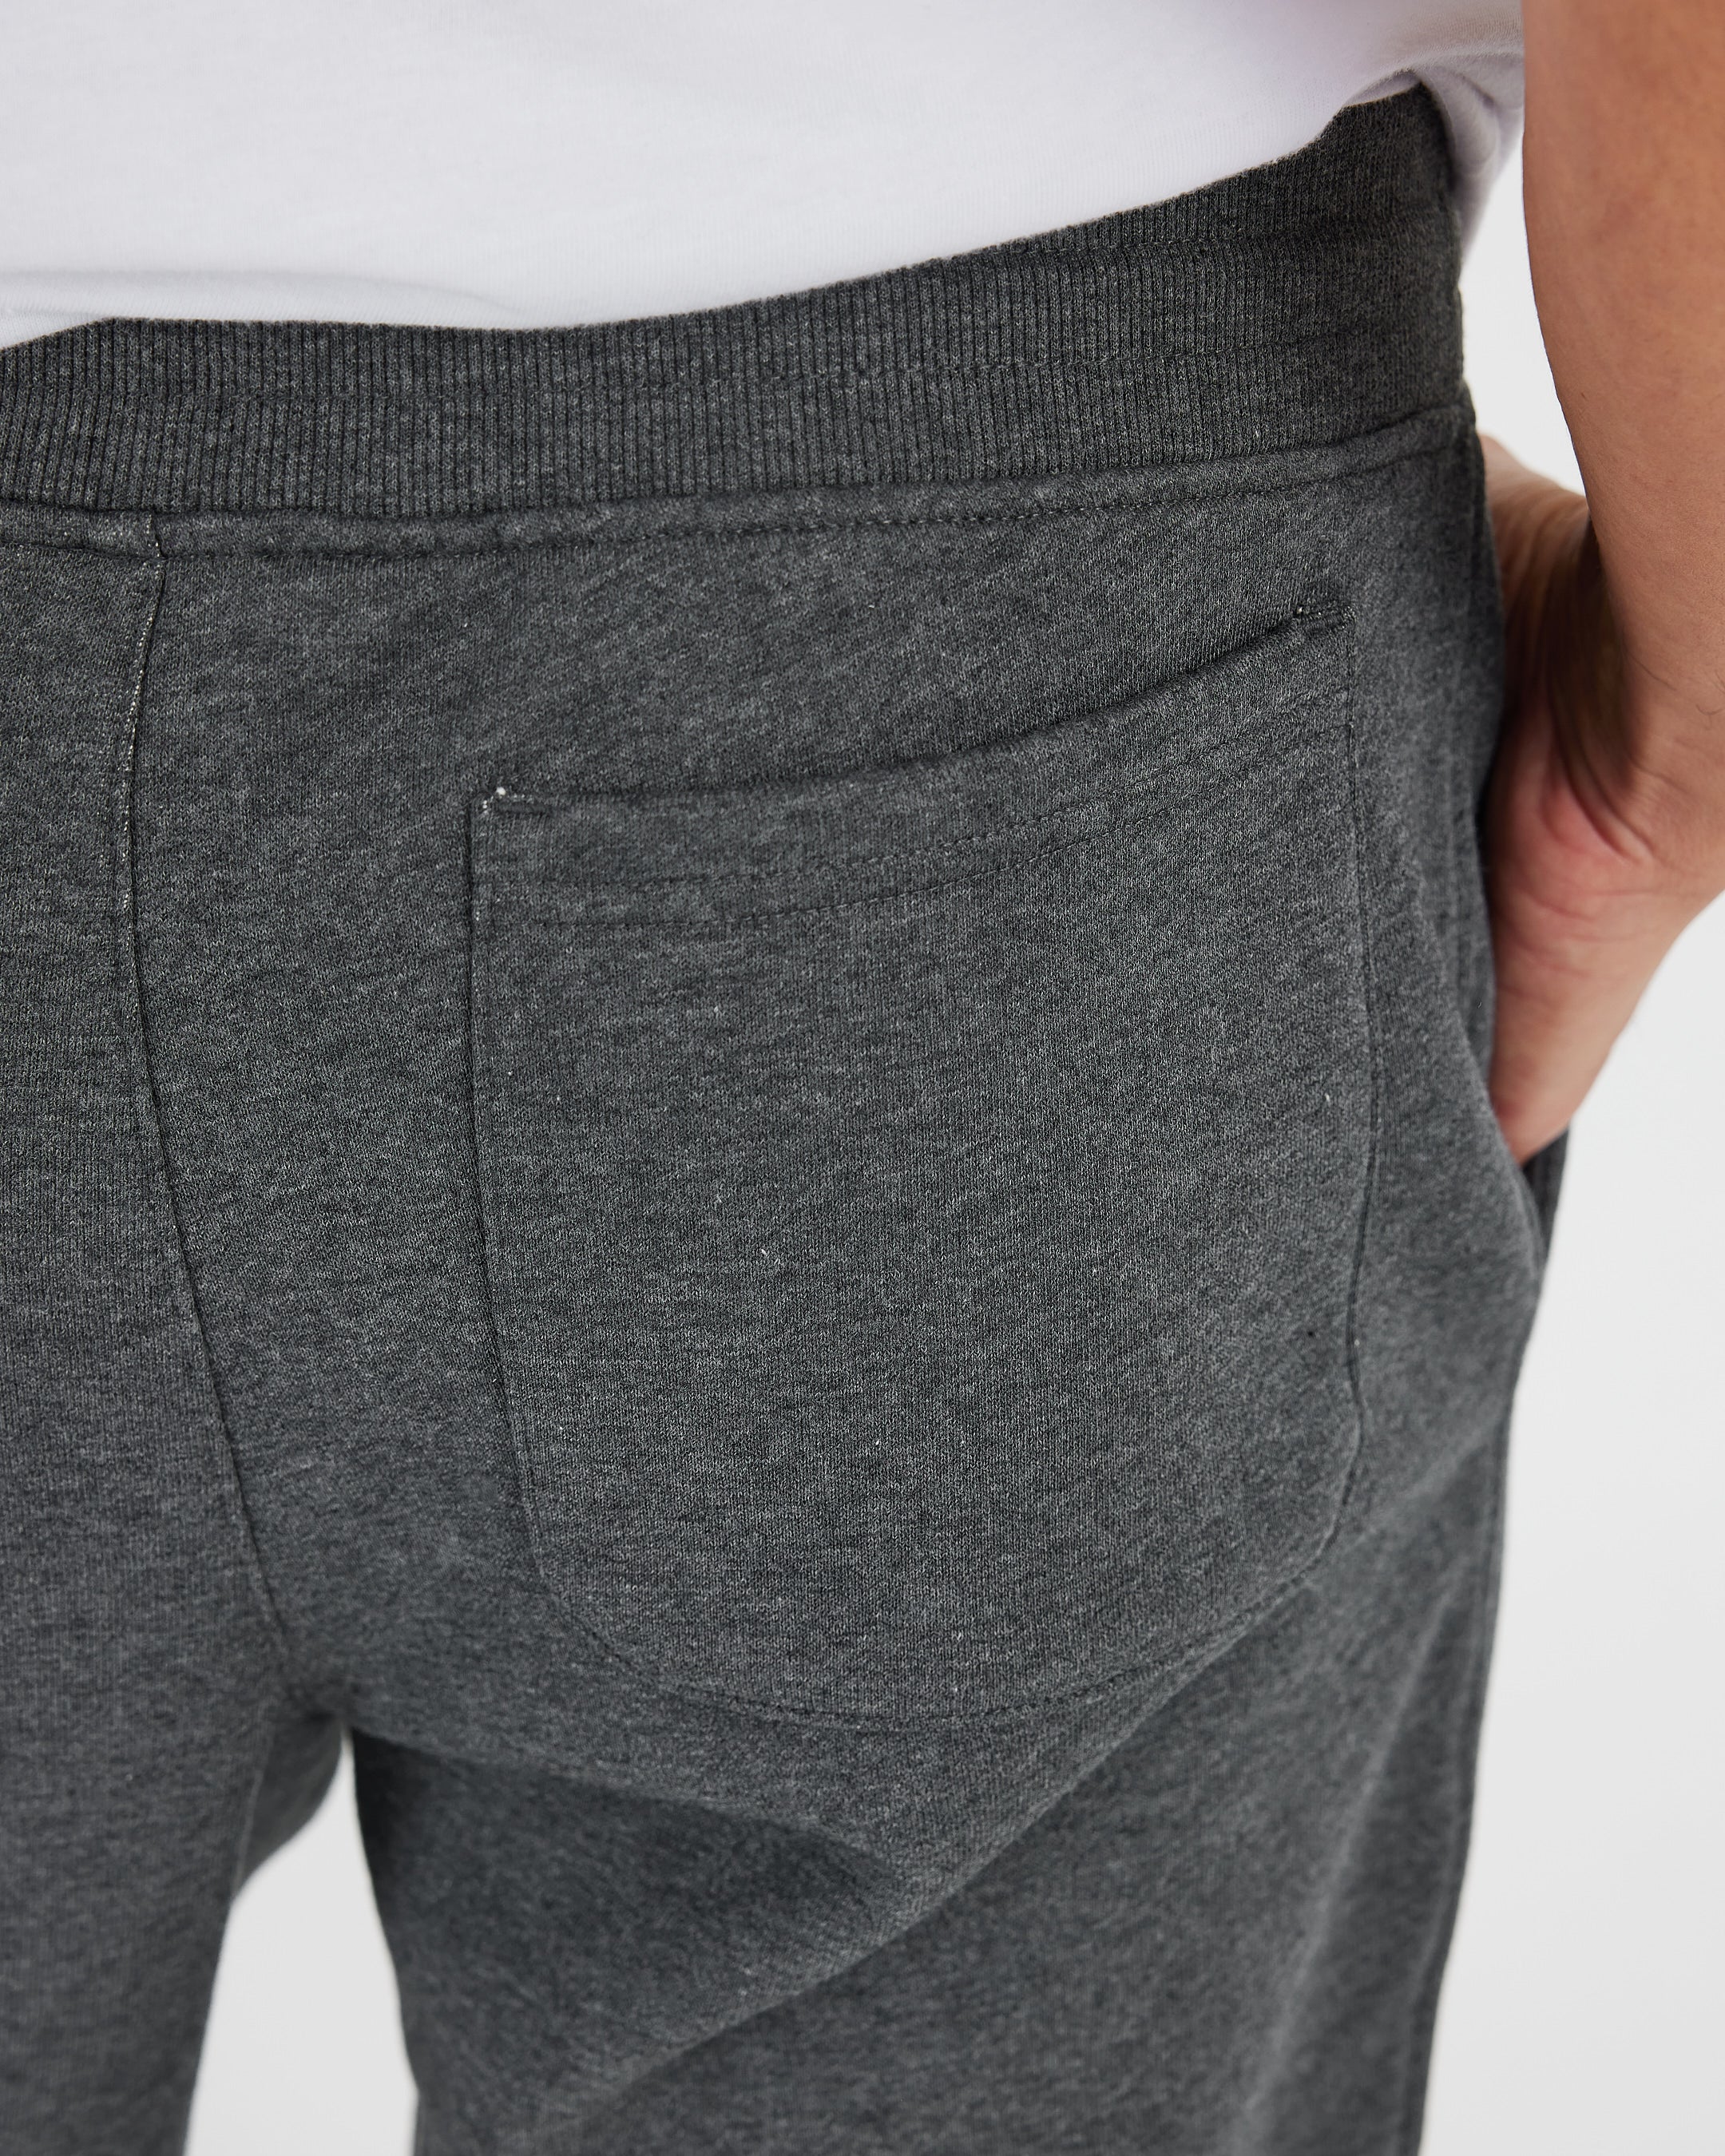 Charcoal Heather Gray Fleece French Terry Jogger